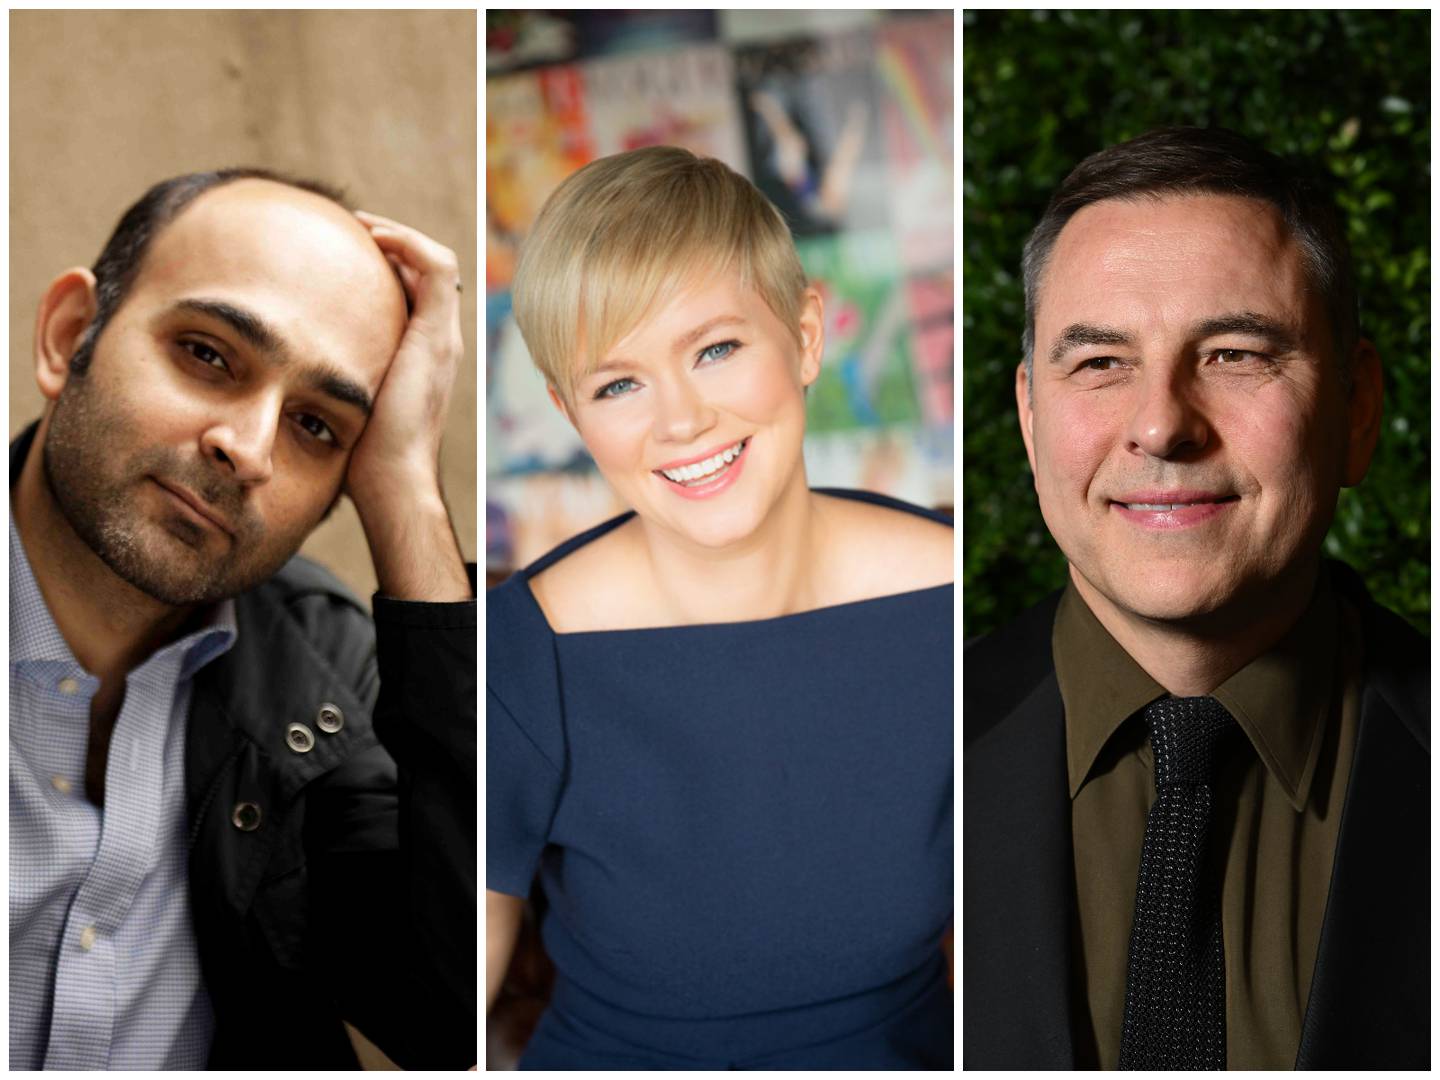 The Emirates Aviation Literary Festival returns to Dubai this week. The lineup includes, from left to right, writers Mohsin Hamid, Cecilia Ahern and comedian David Walliams.Photo: Emirates Air Festival/Getty